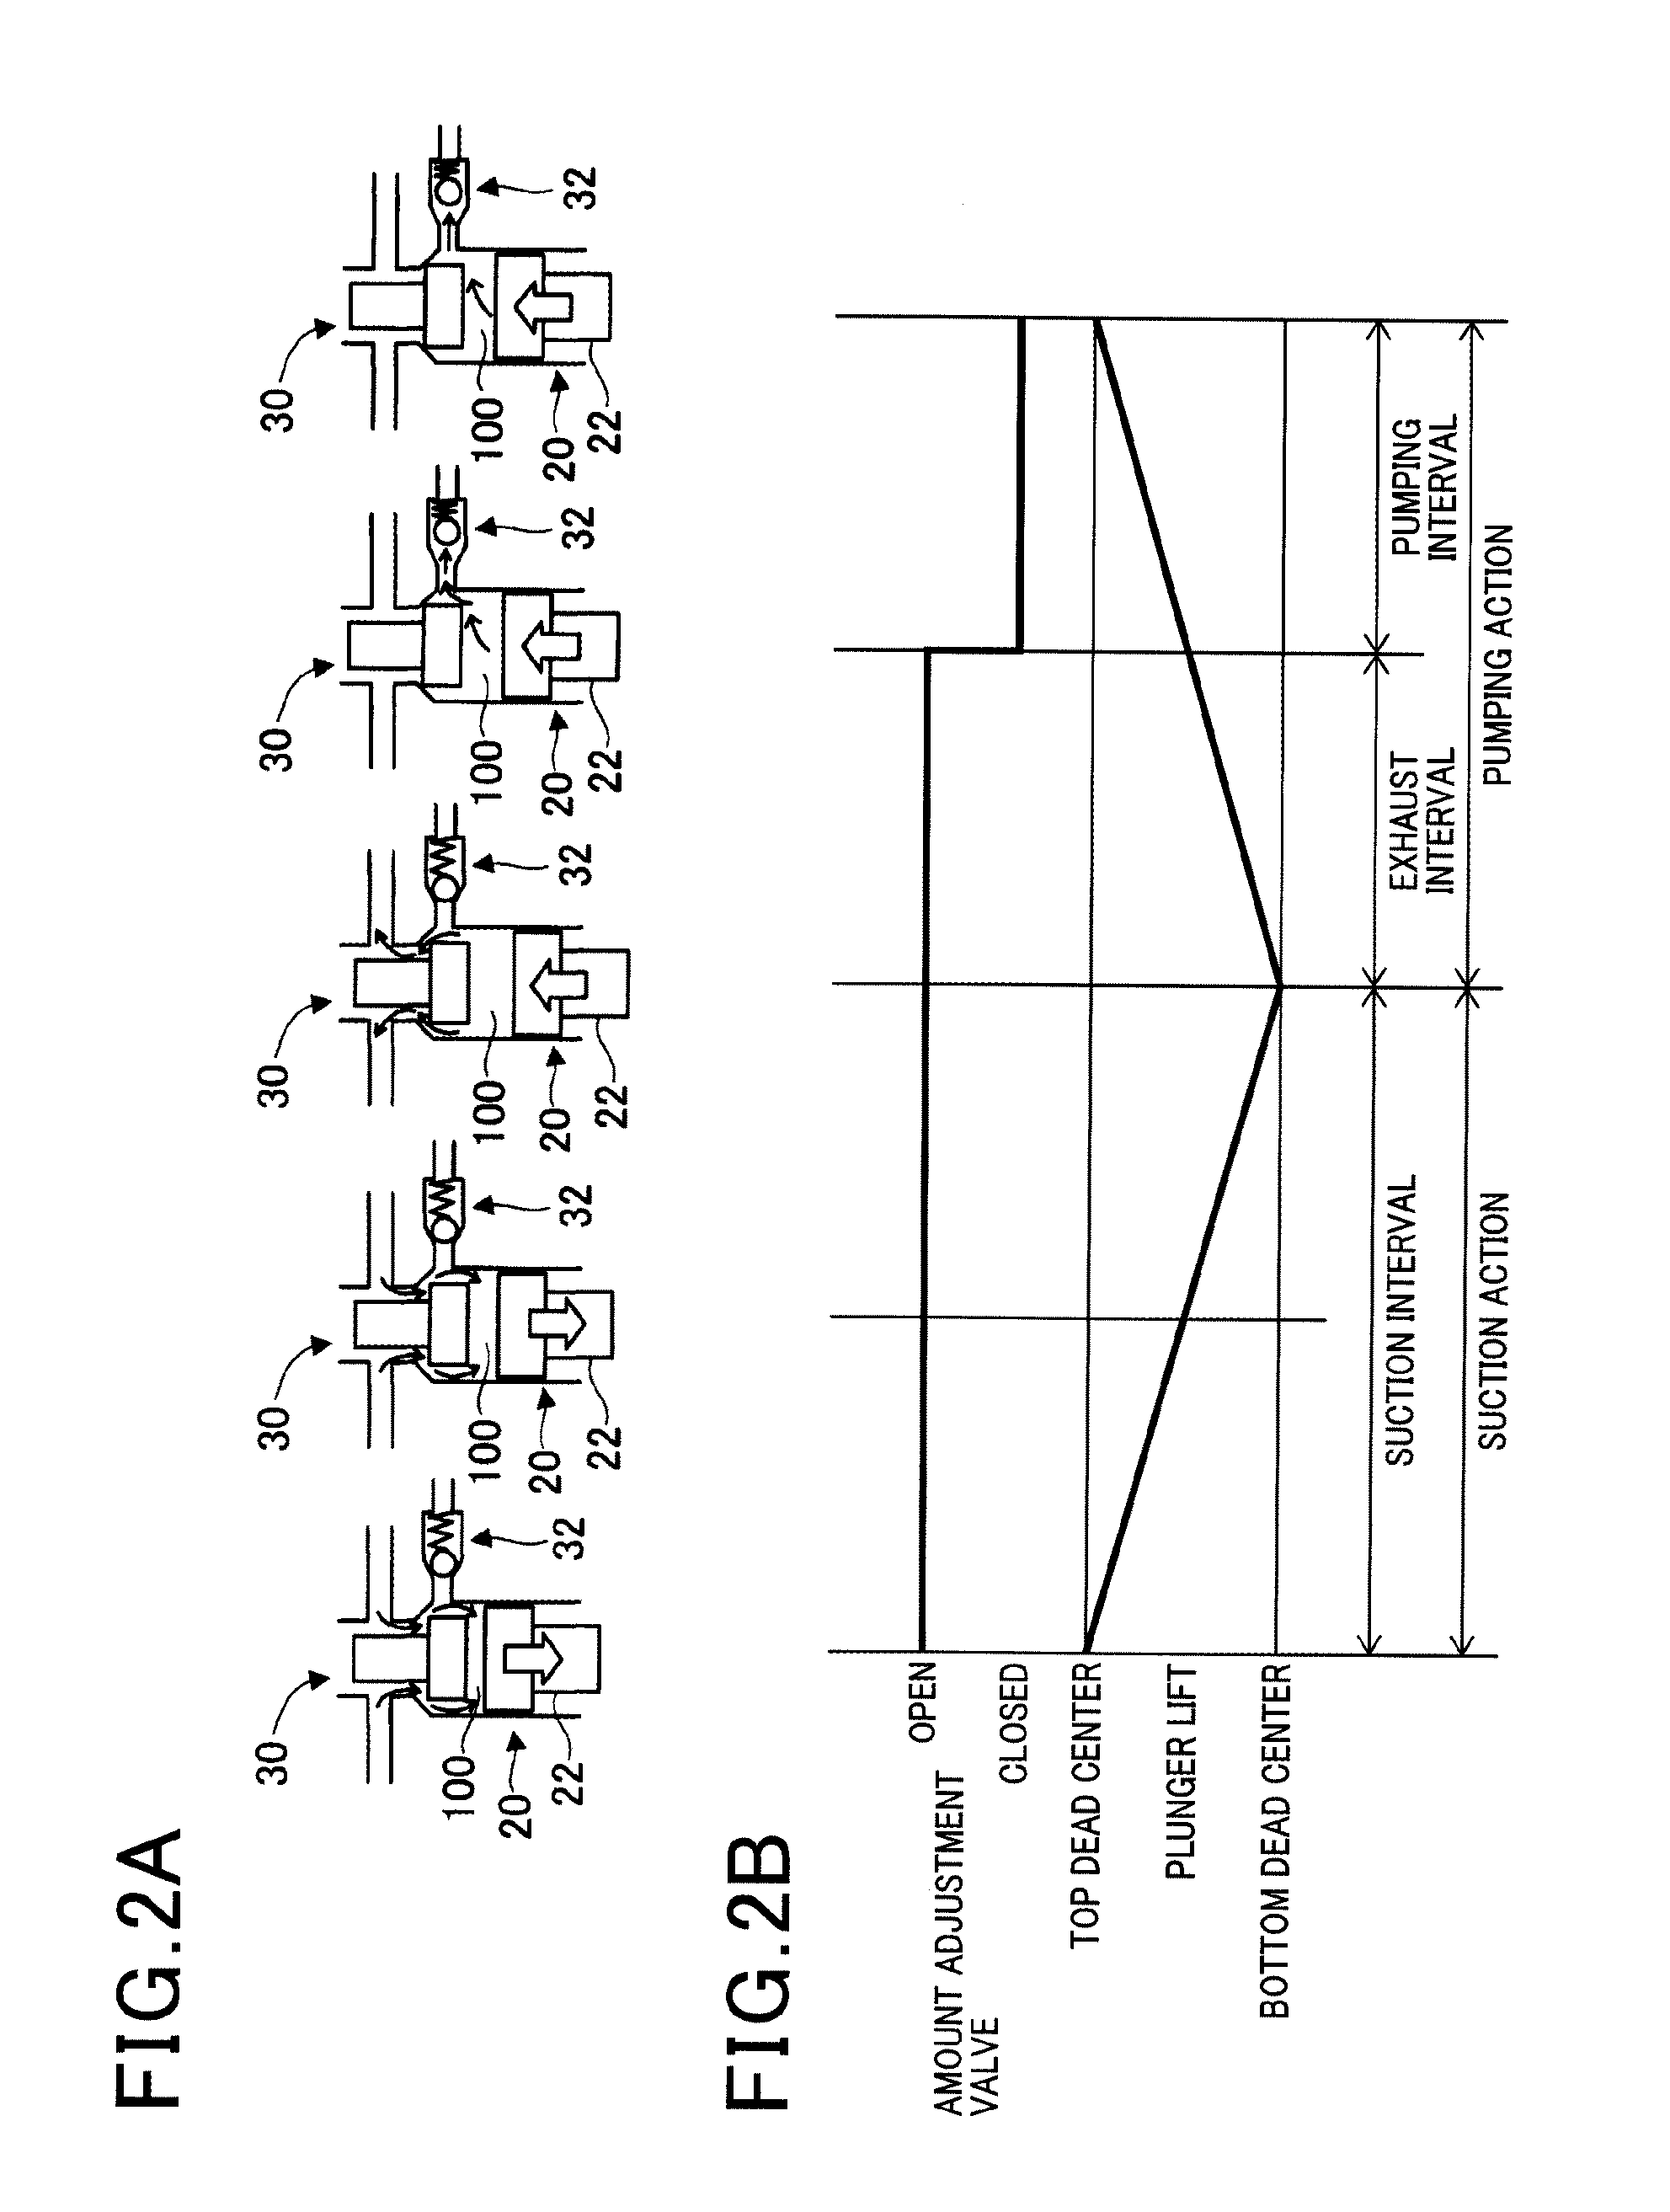 Pump control apparatus for fuel supply system of fuel-injection engine